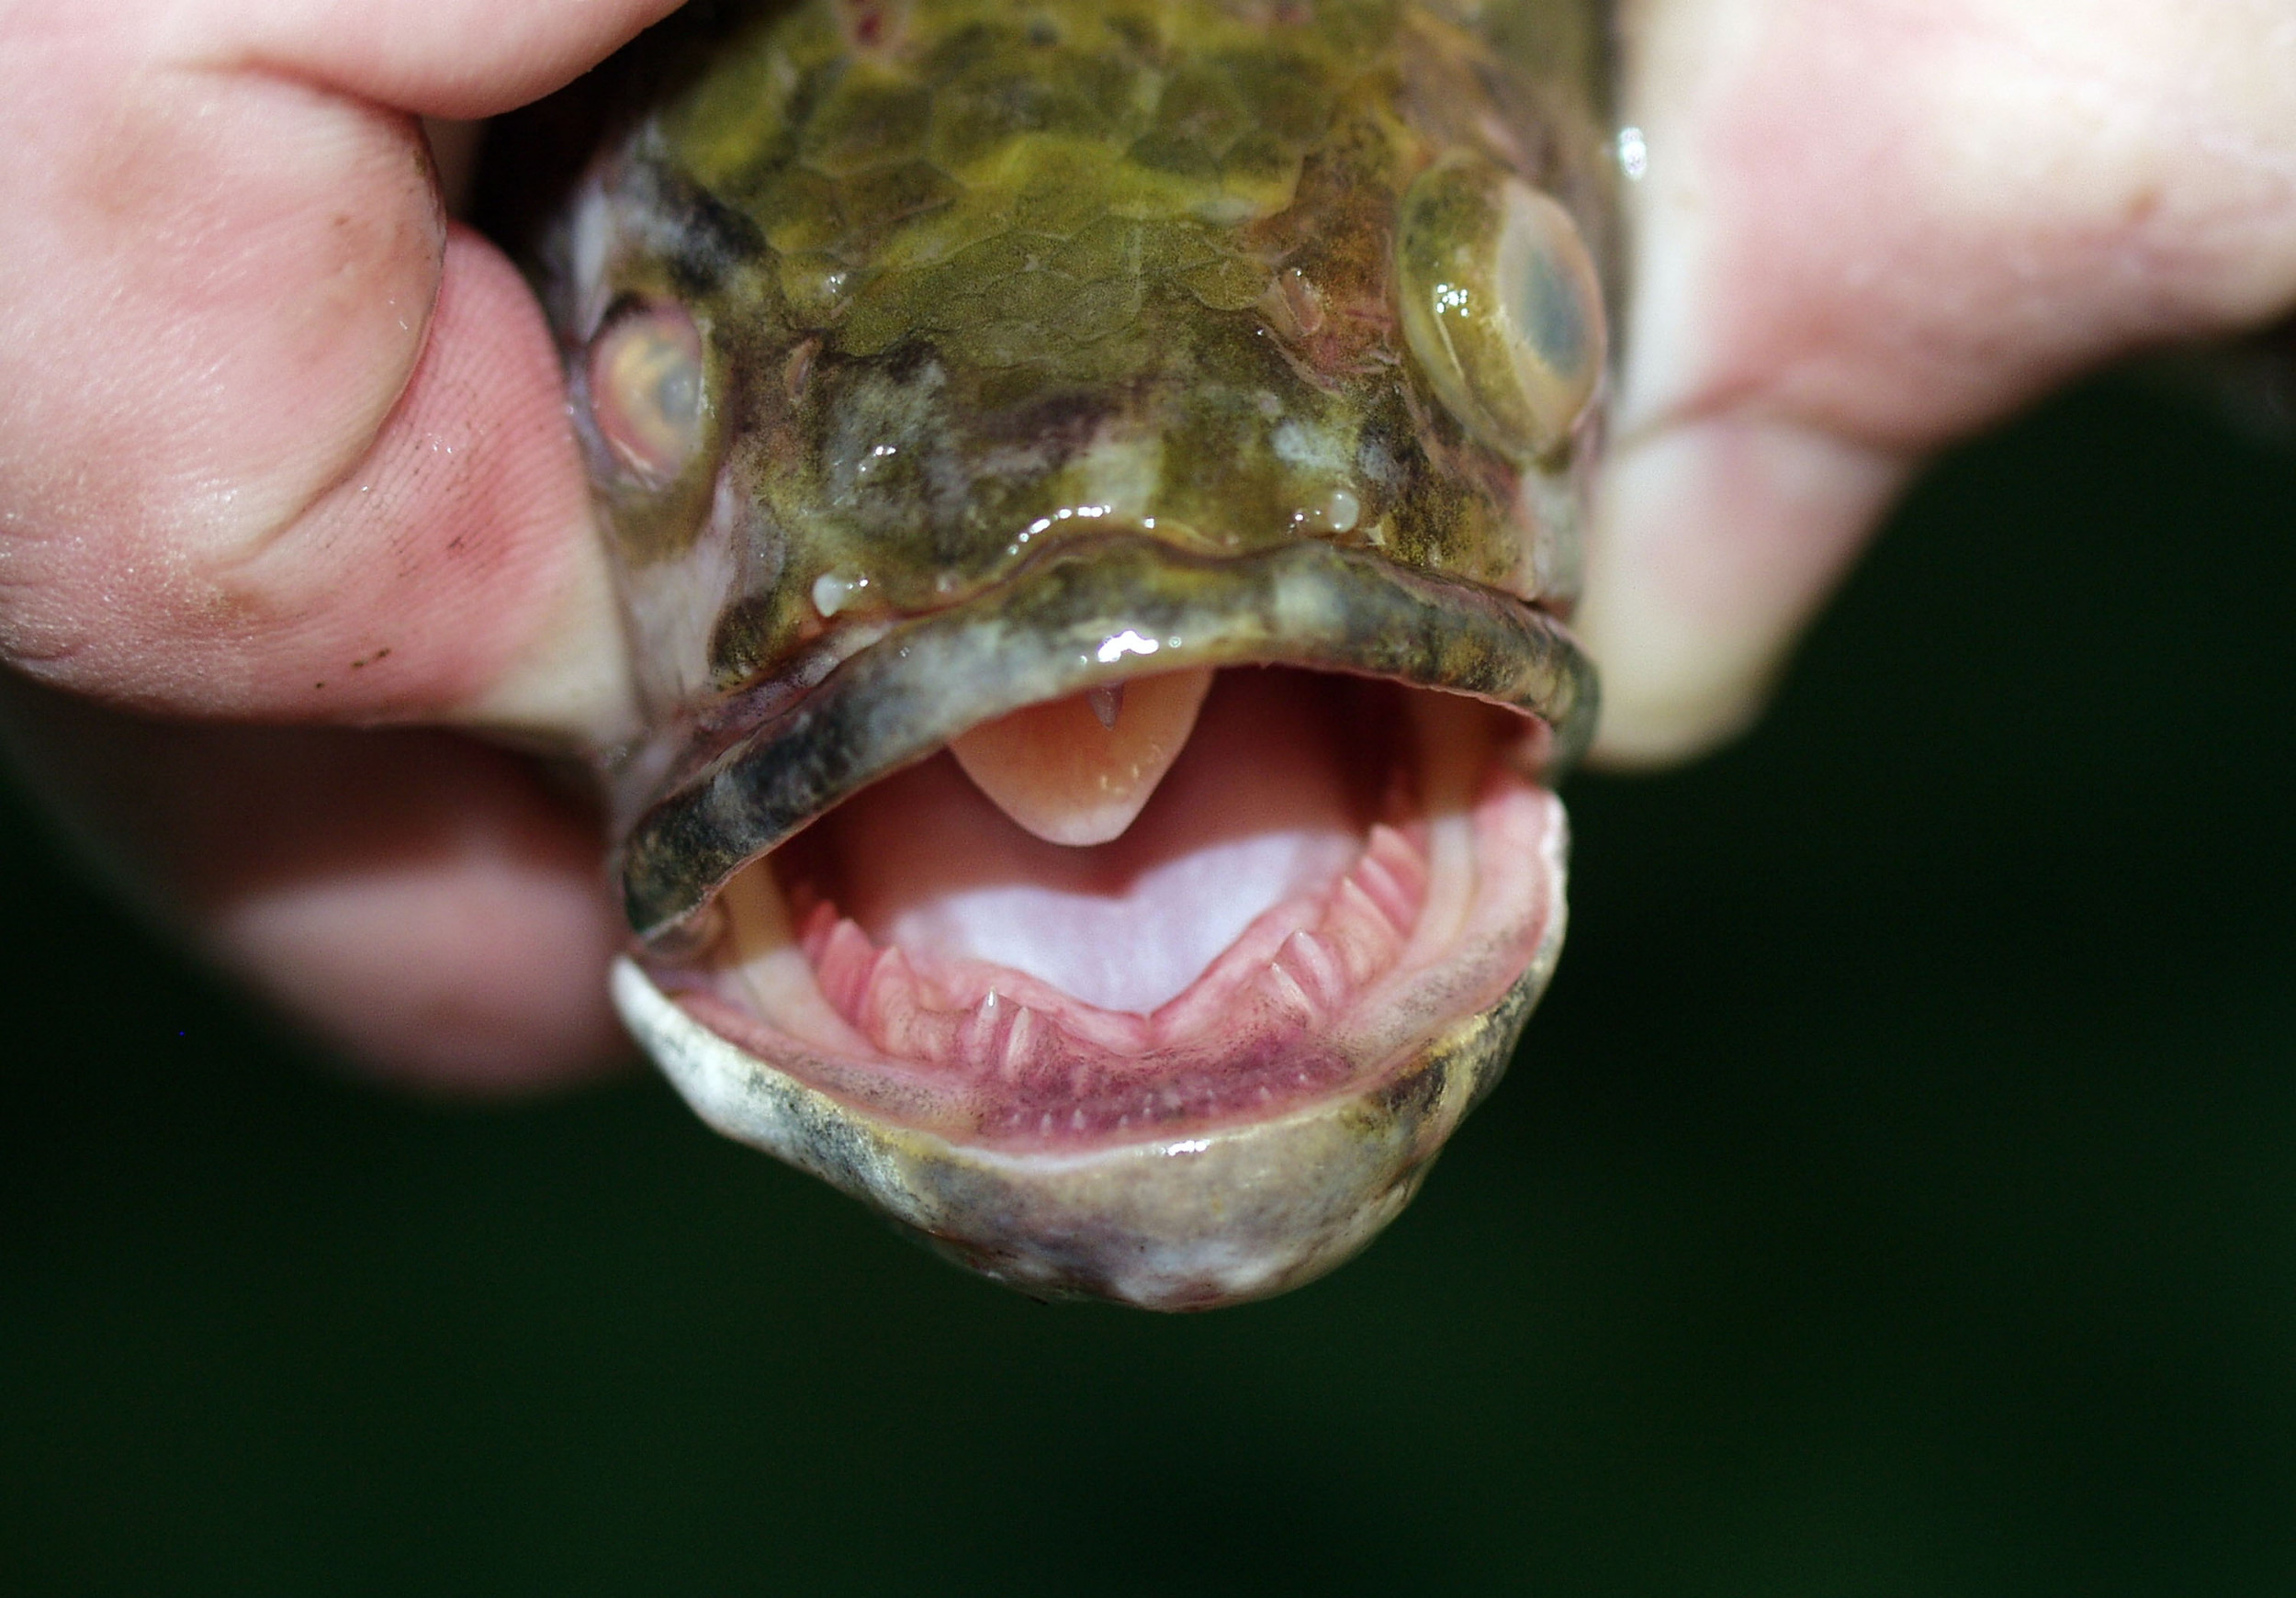 facts about snakehead fish